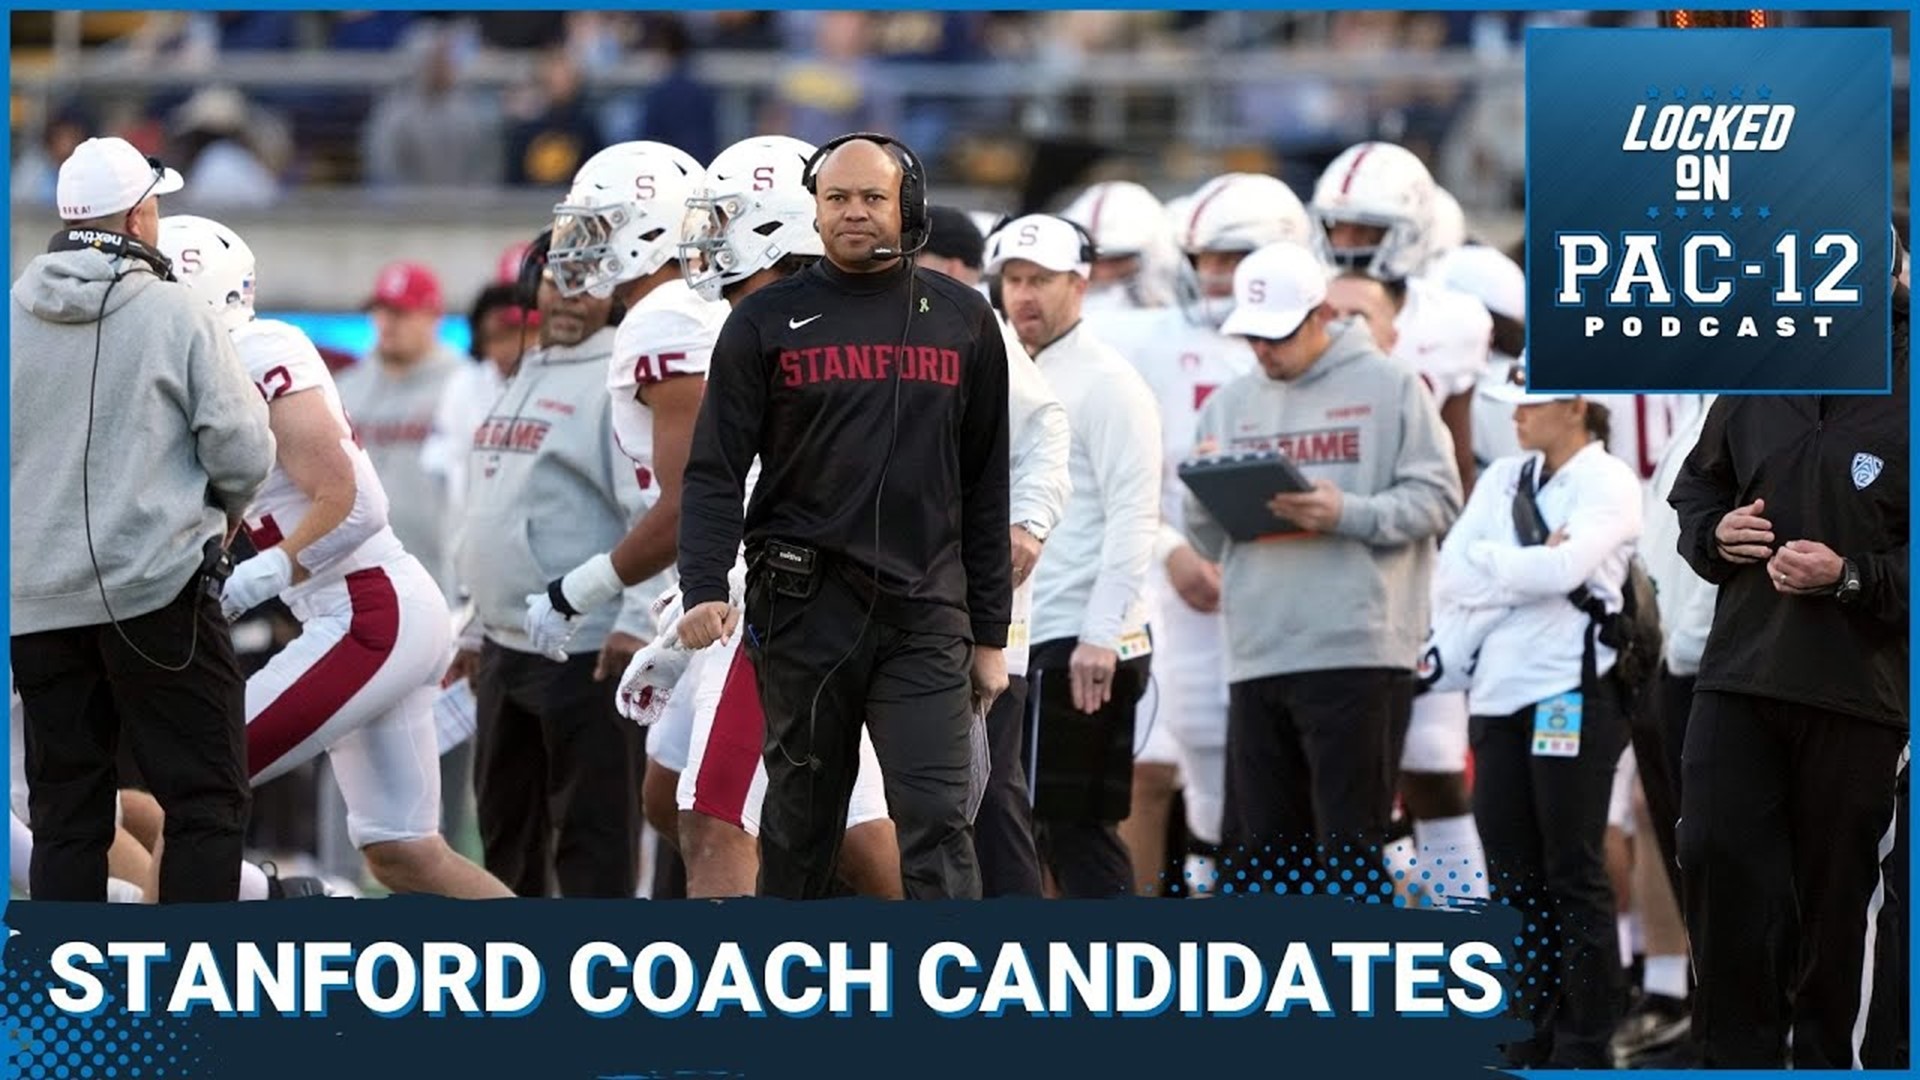 After 12 years at the helm of Stanford's football program, David Shaw has stepped aside after consecutive 3-9 seasons. The Cardinal are now looking for a new leader.